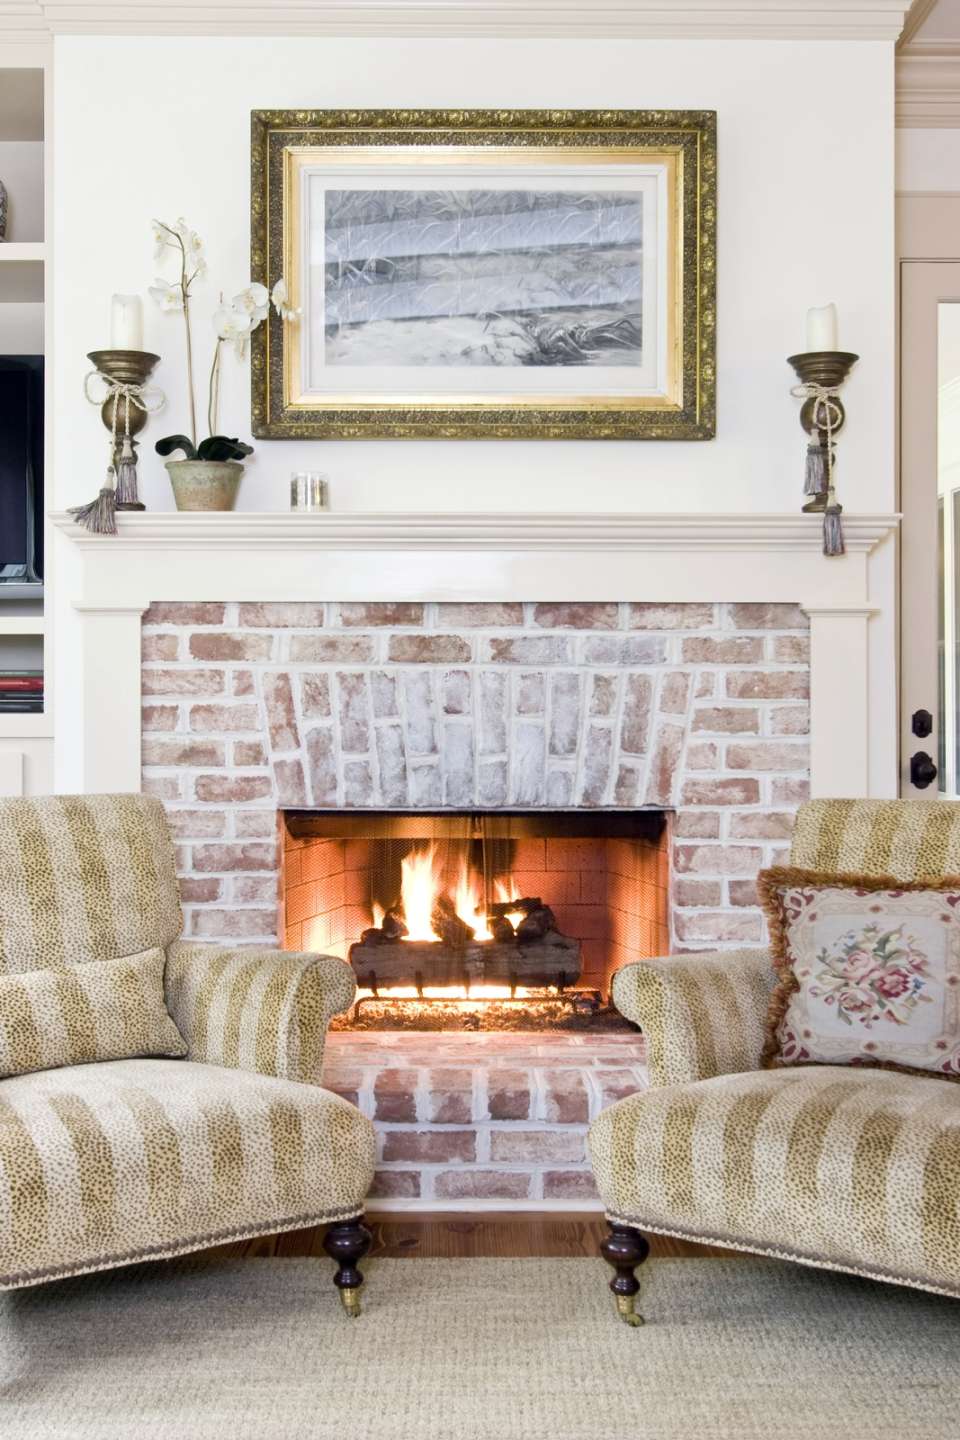 Pale Stone Fireplaces and White Mantel Ideas - Town & Country Living